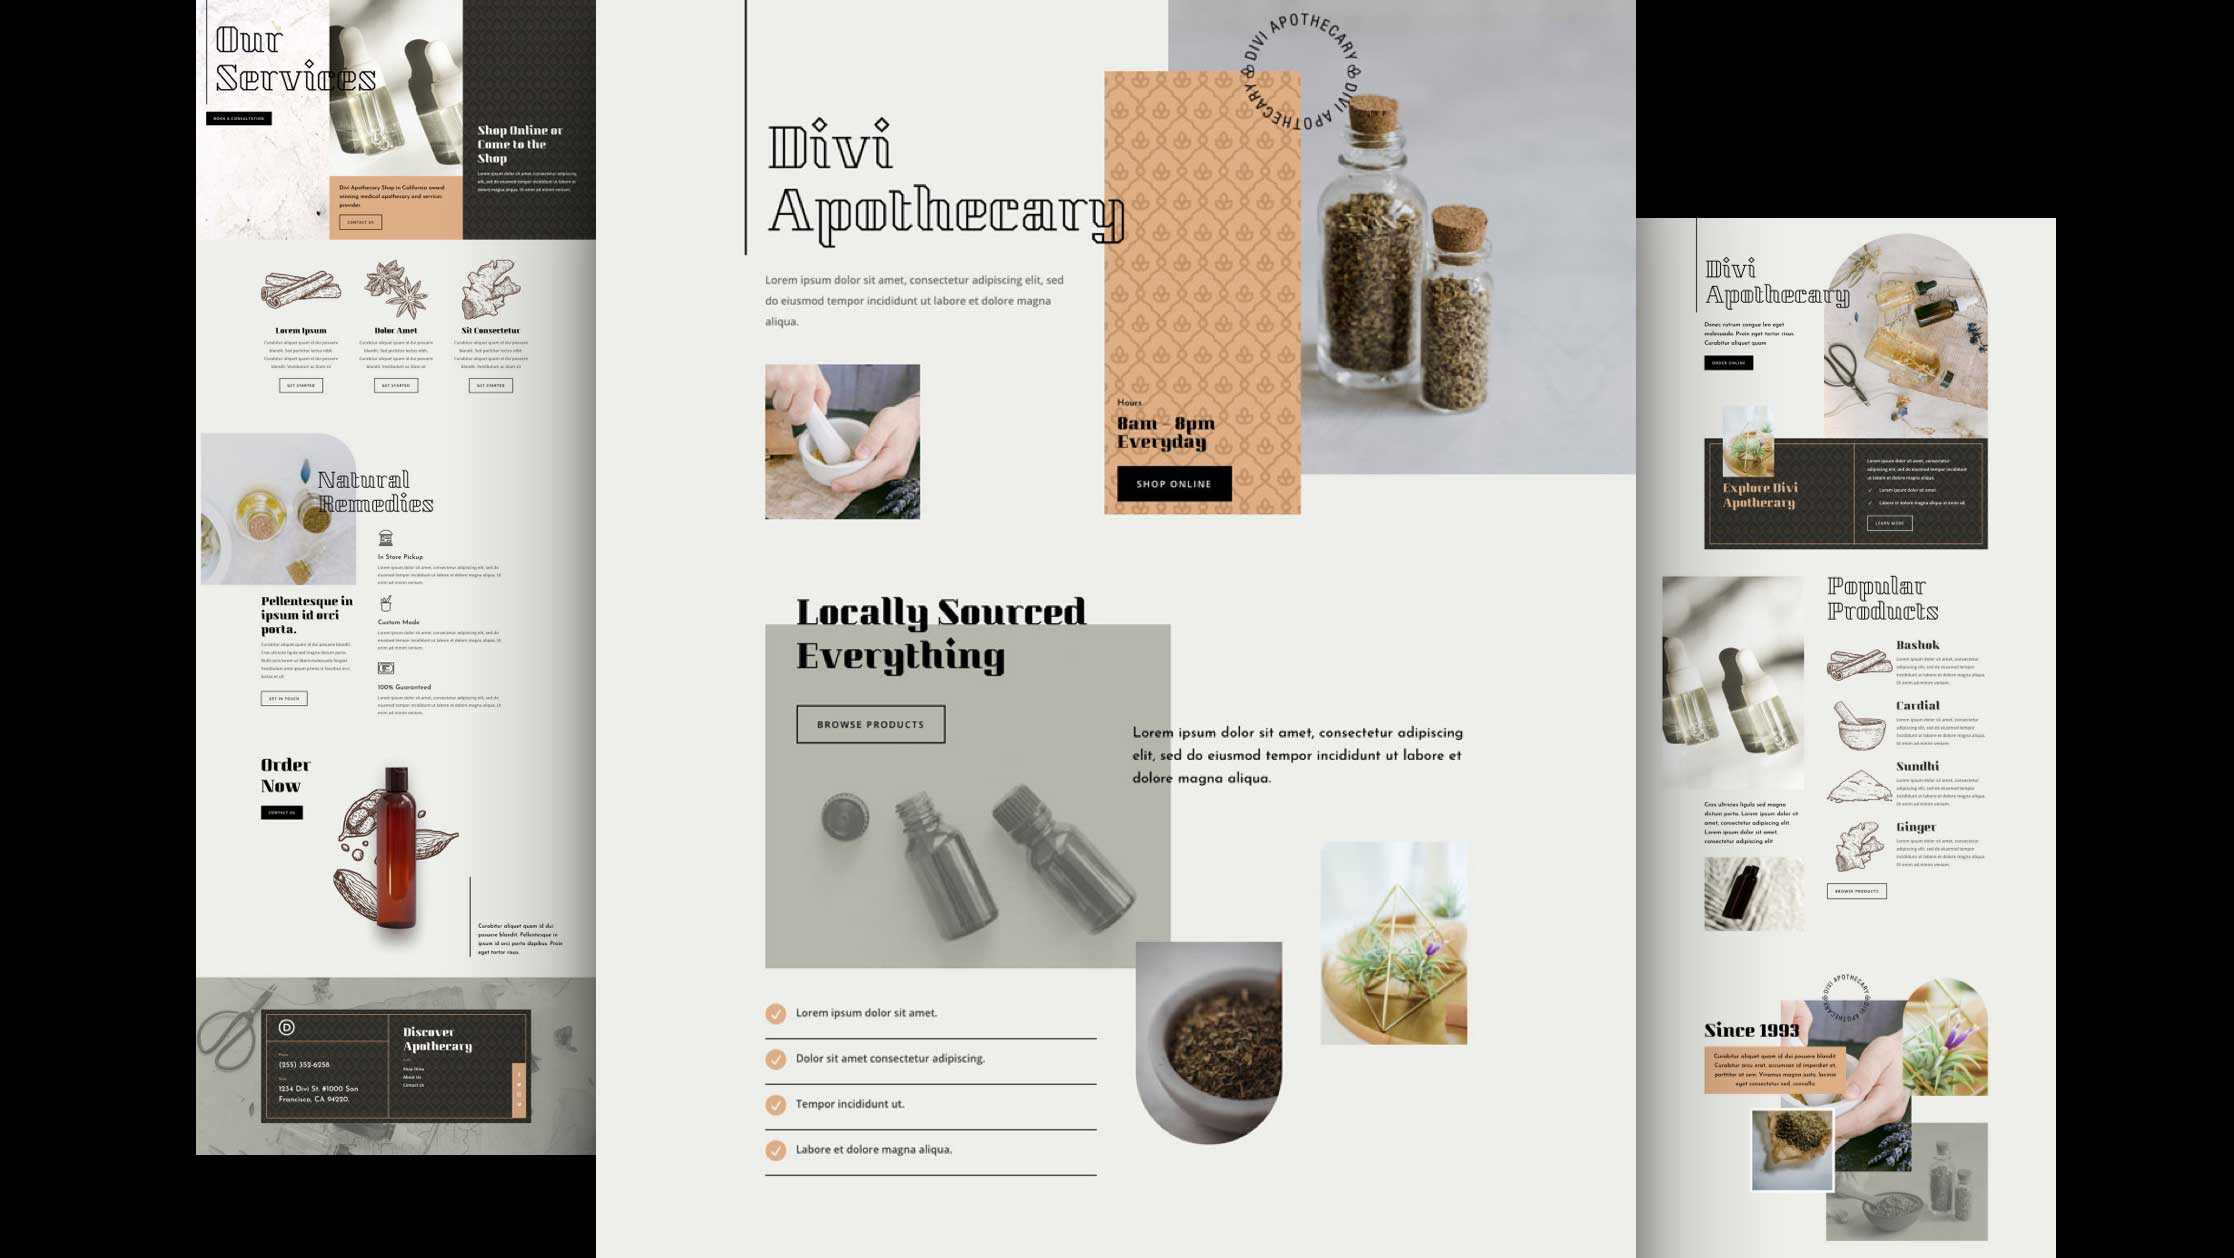 Get a FREE Apothecary Layout Pack for Divi